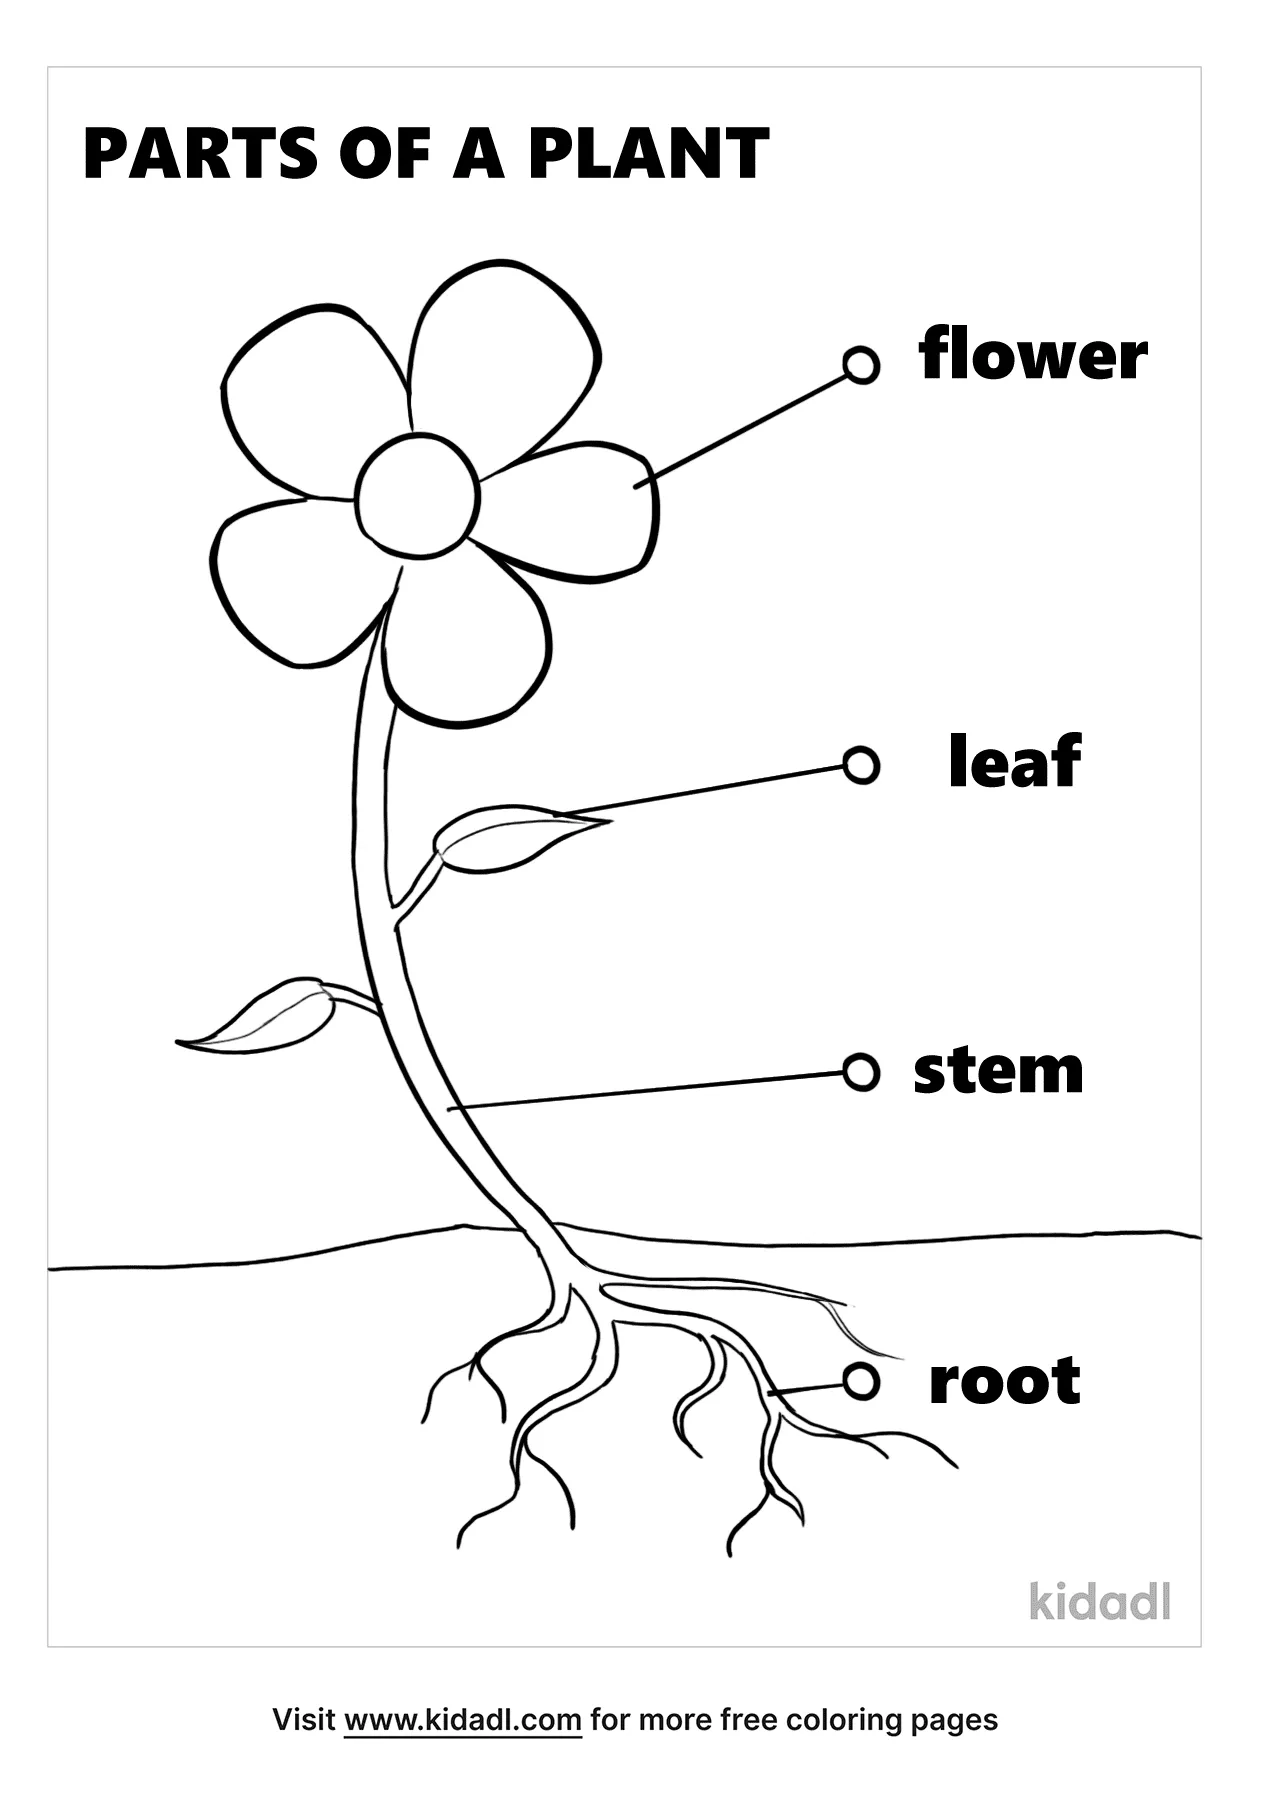 Free Parts Of A Plant Coloring Page | Coloring Page Printables | Kidadl